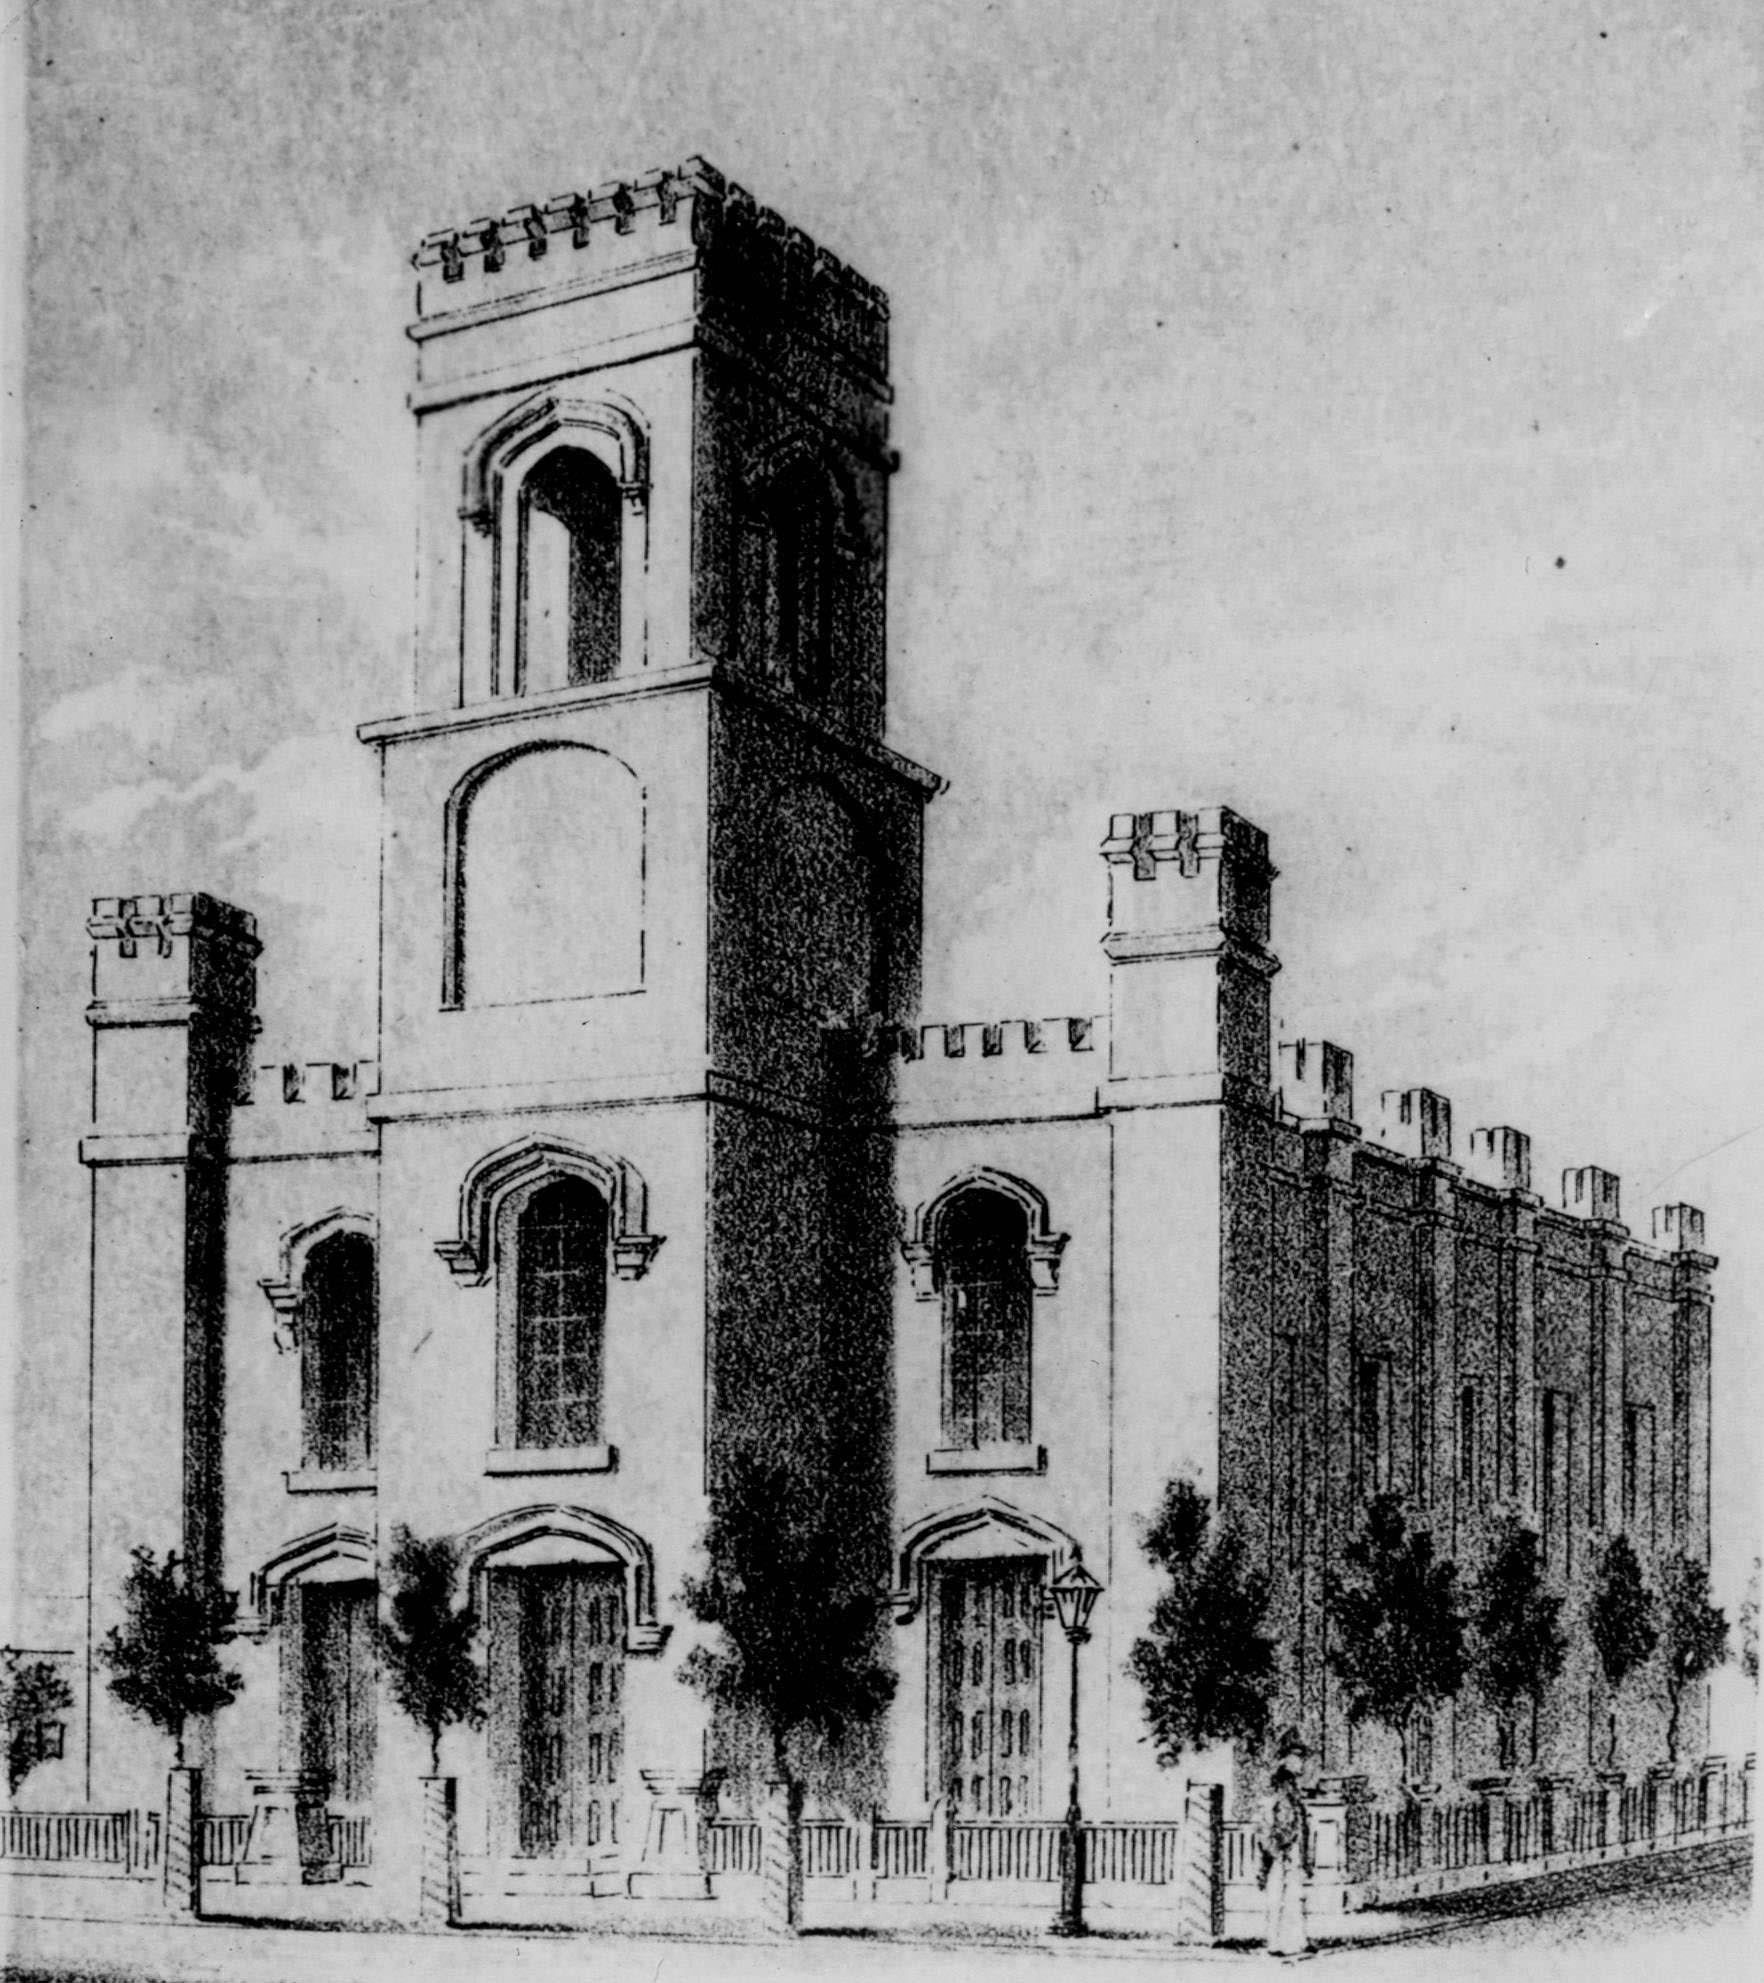 It The Fist Congregational Church opened on September 23, 1849 when Sacramento was still very small.